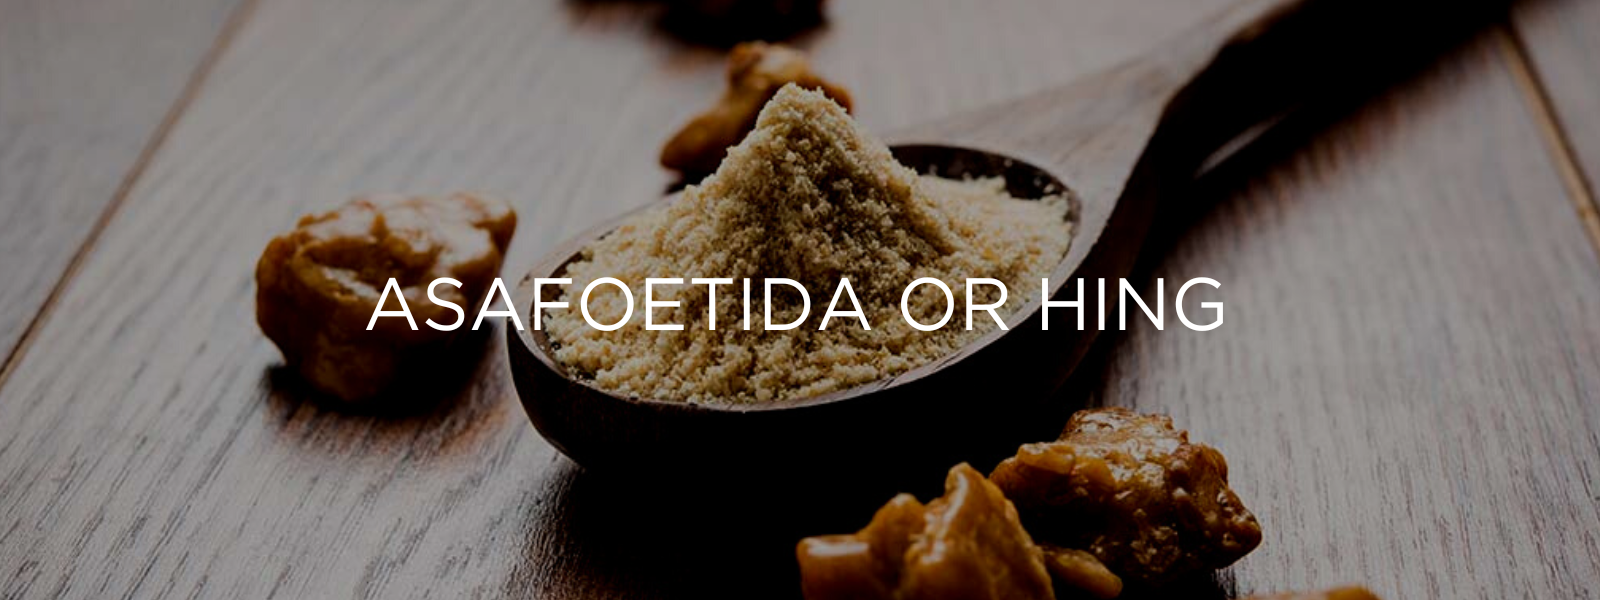 Asafoetida or Hing- Health Benefits, Uses and Important Facts